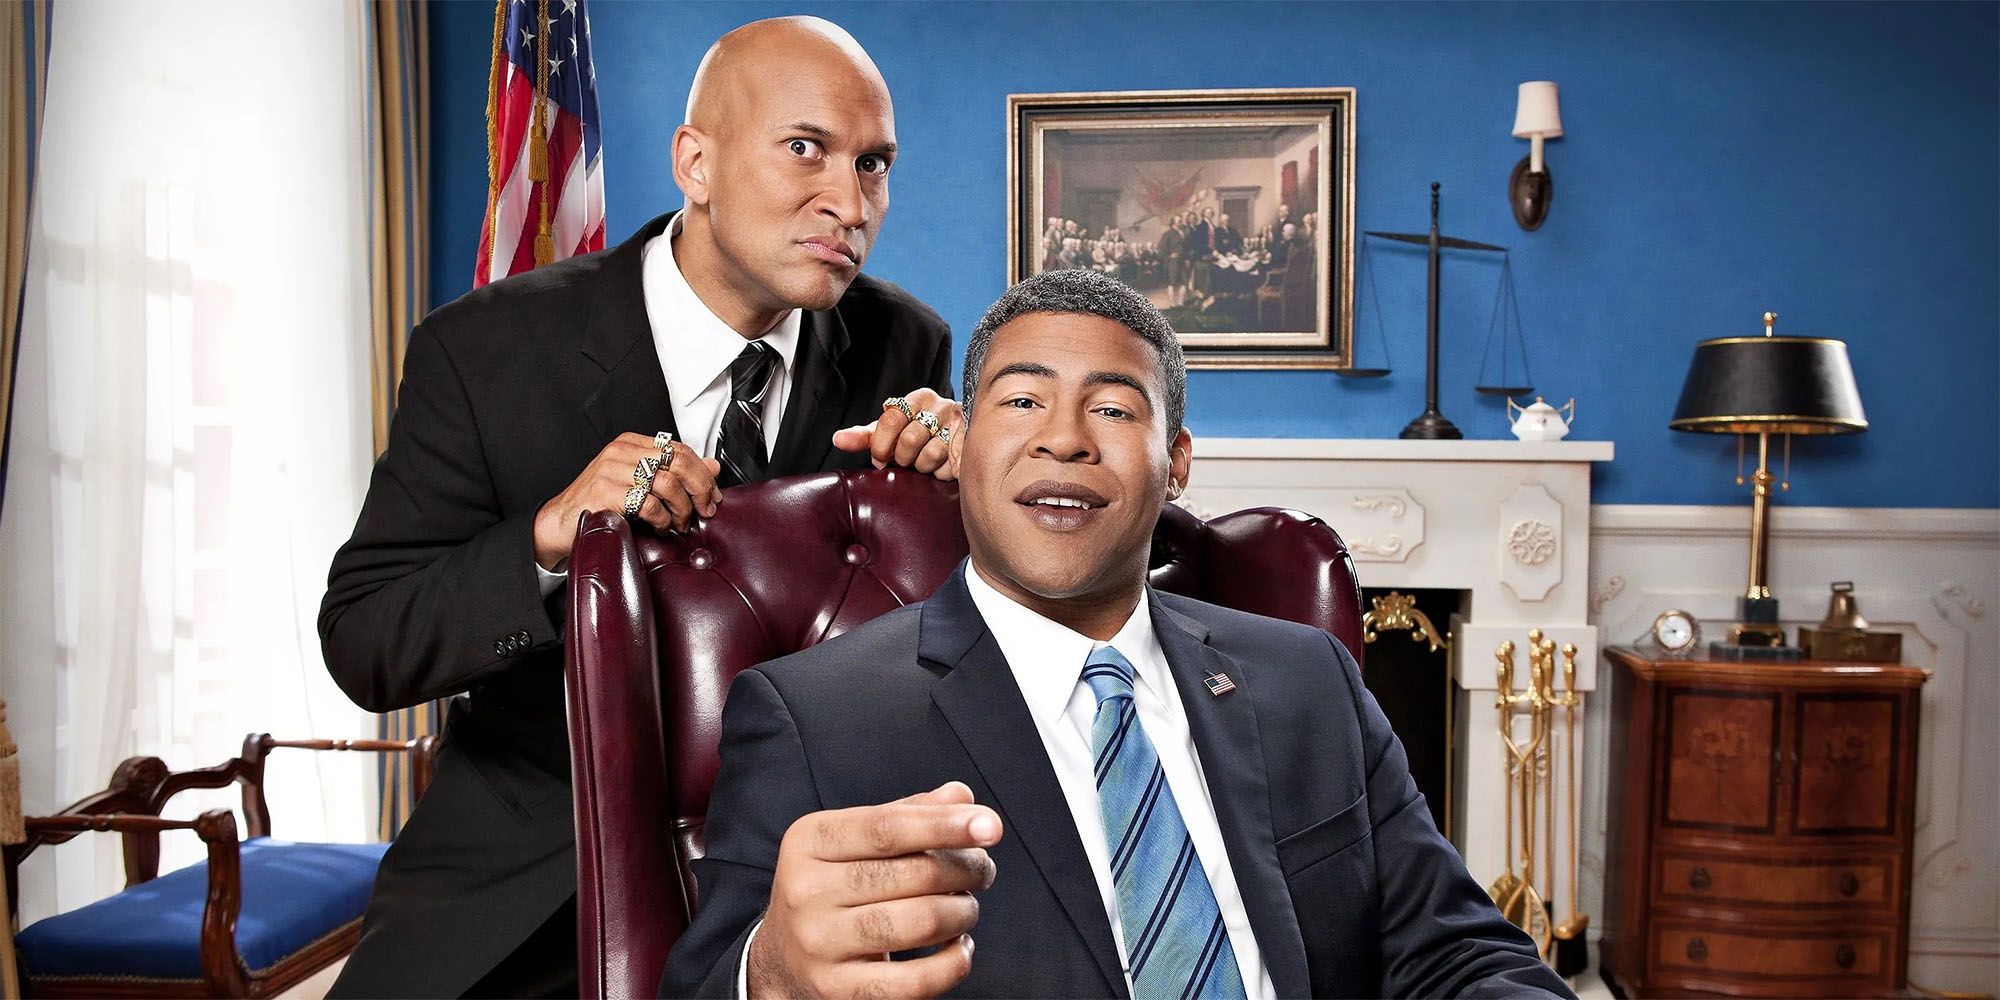 Key and Peele in an Obama sketch for their comedy series.